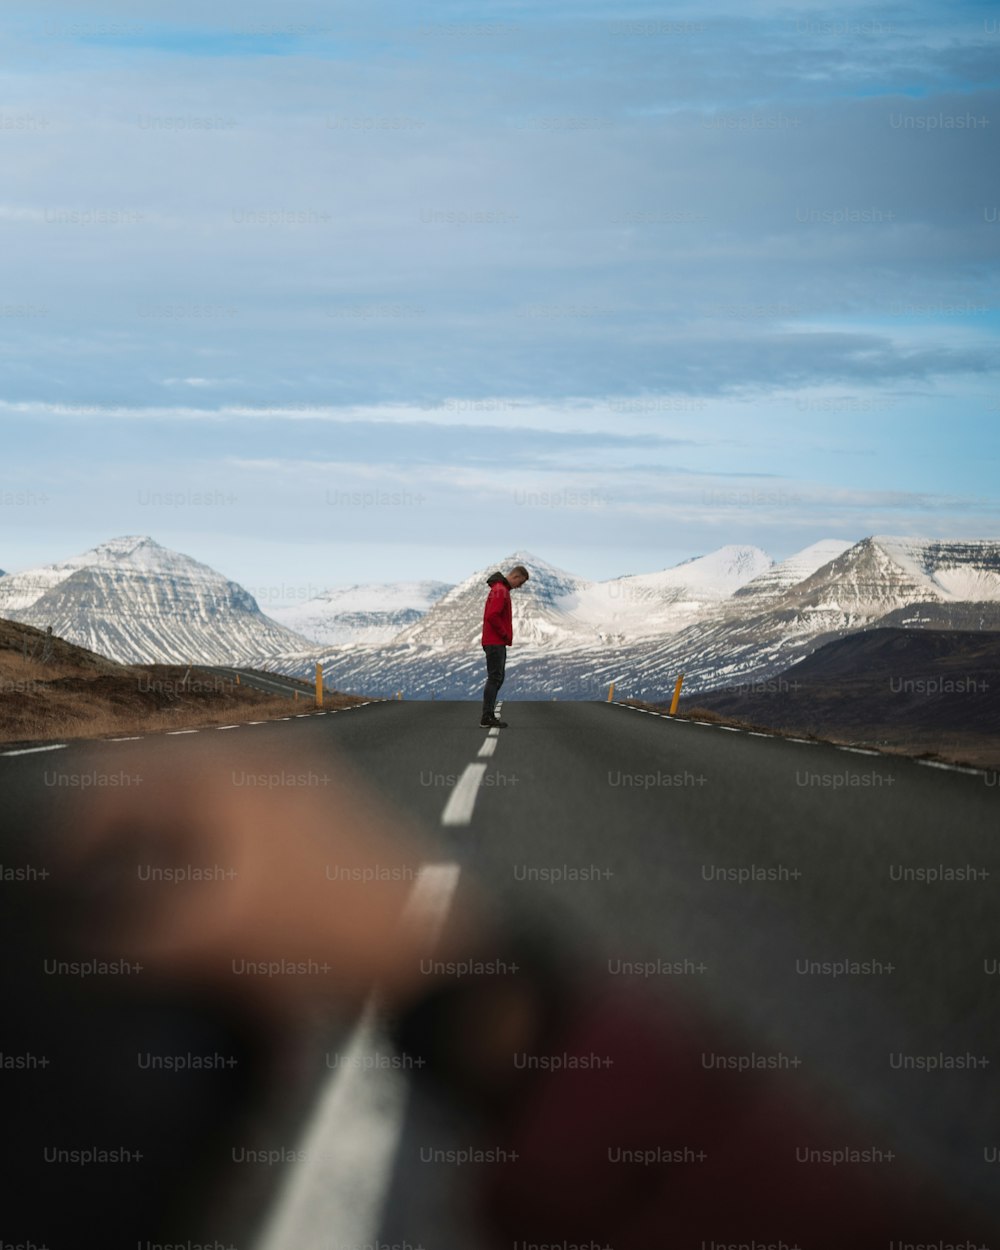 a person walking on a road with snow covered mountains in the background